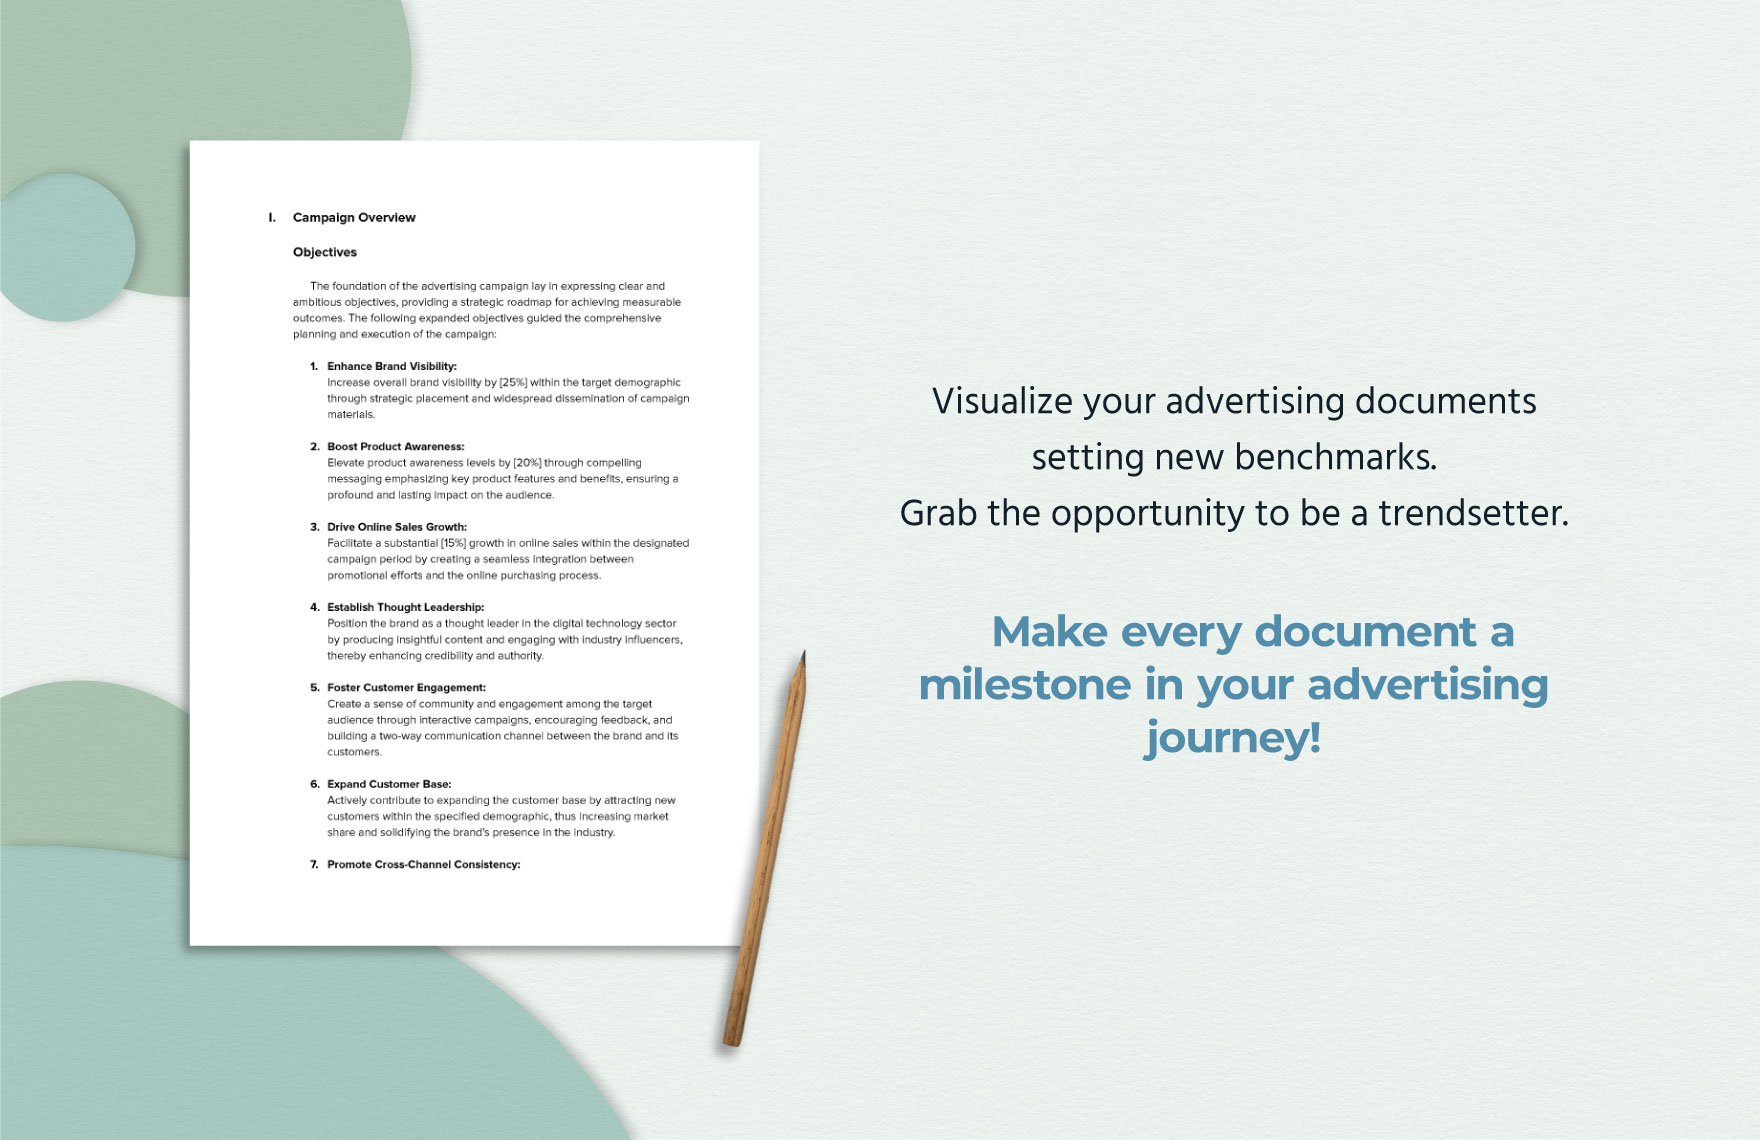 Advertising Campaign Journal Template